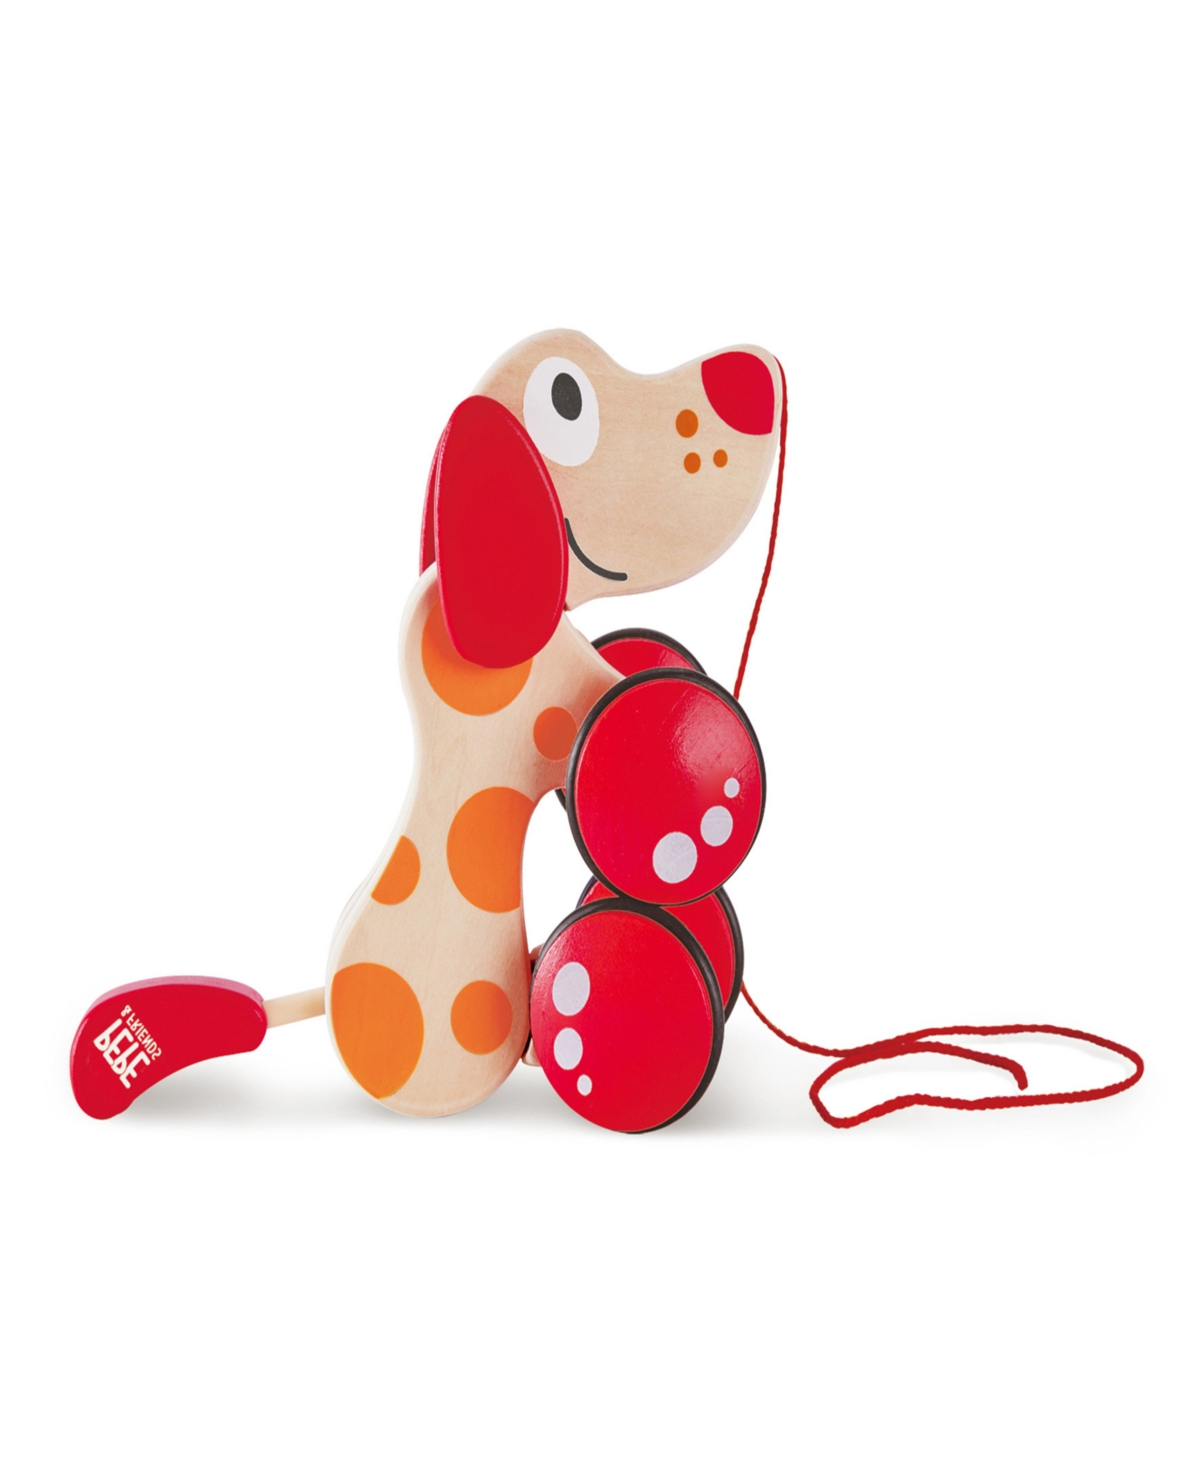 Hape Walk-a-long Pepe Puppy Toddler Toy In Multi